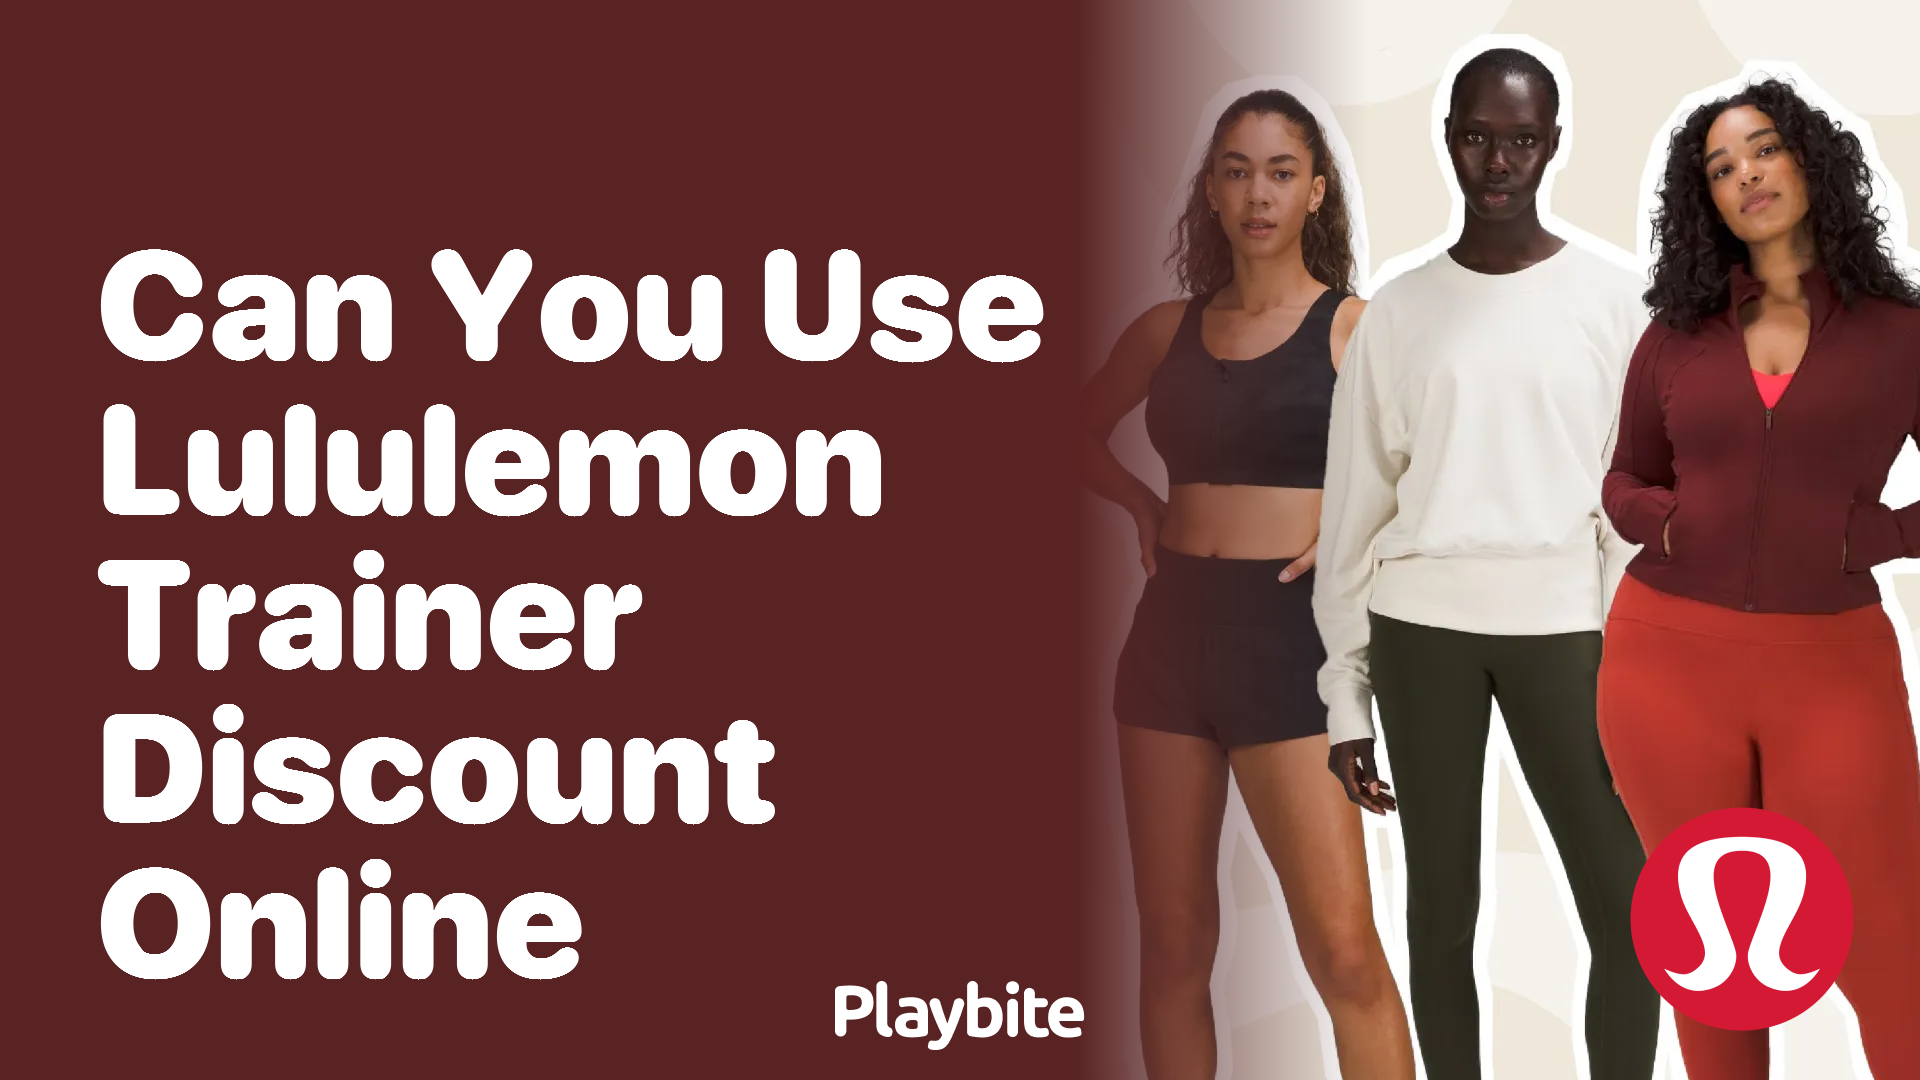 Does Lululemon Price Match In-Store? - Playbite